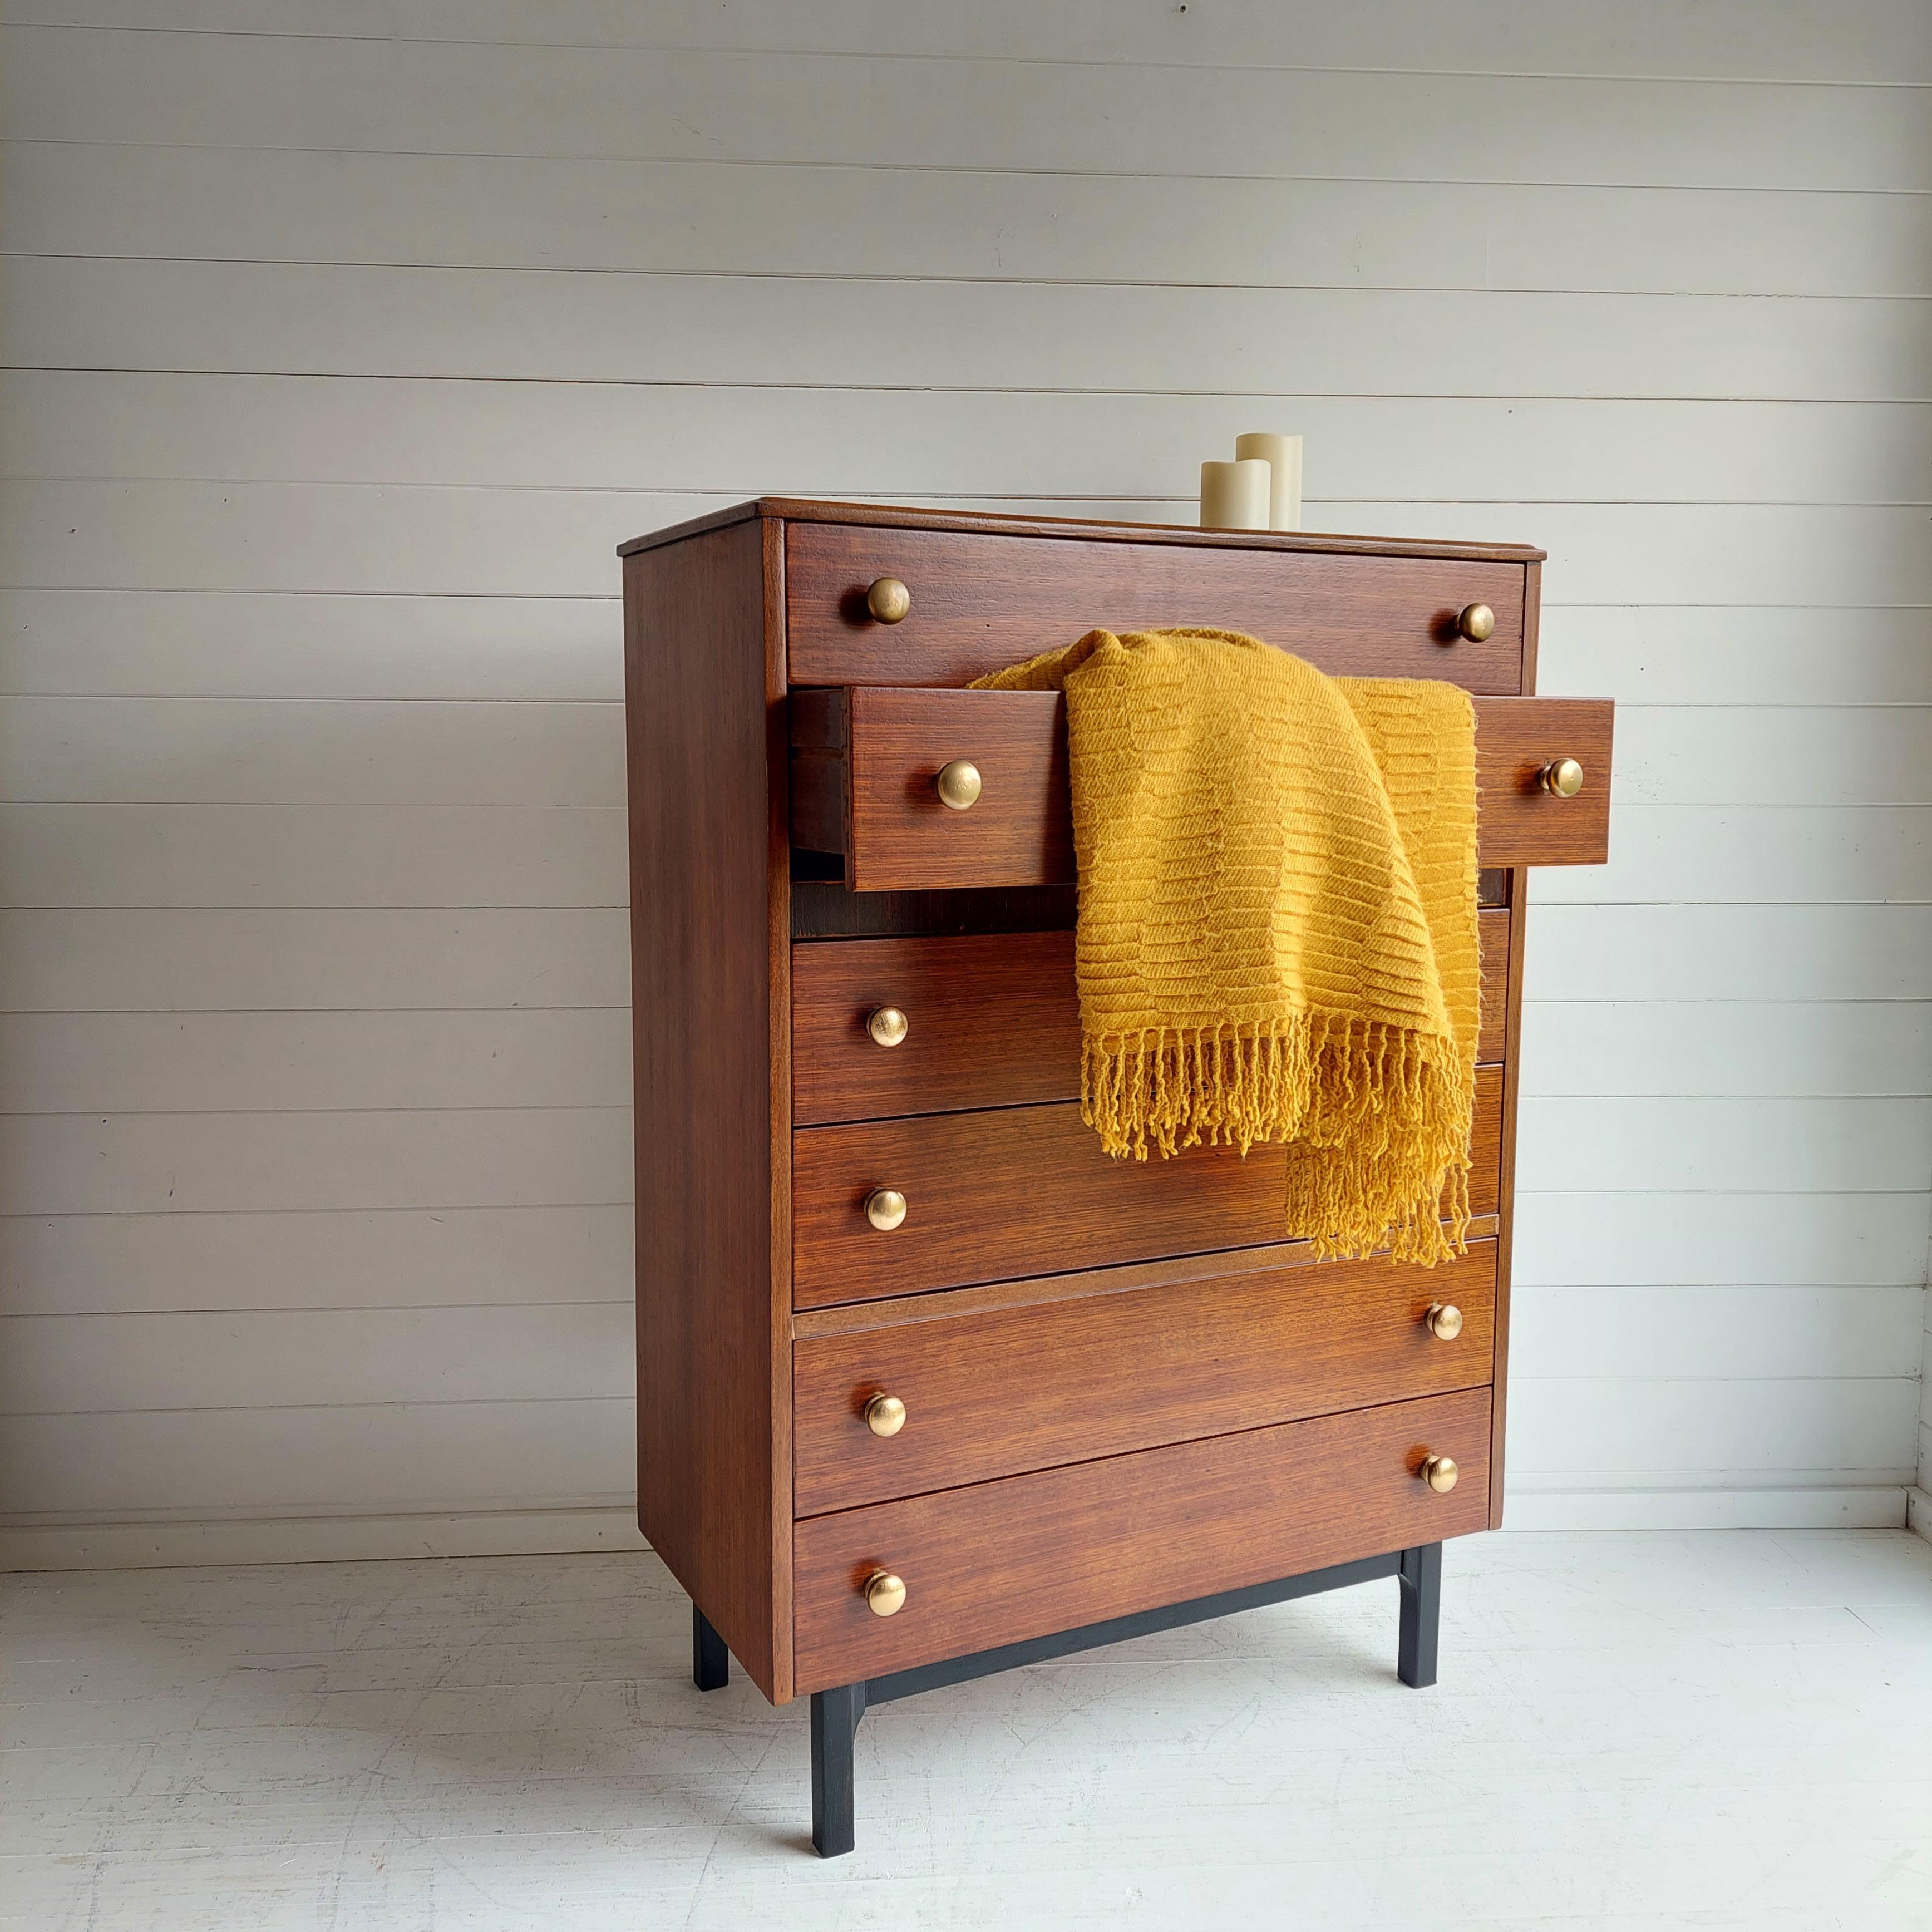 Vintage Danish style teak tallboy / chest of drawers for sale.
Made probably in London by Harris Lebus in the 1960s, this piece is of an outstanding quality and fabulous design.

Retro midcentury tall boy chest of drawers made in teak.